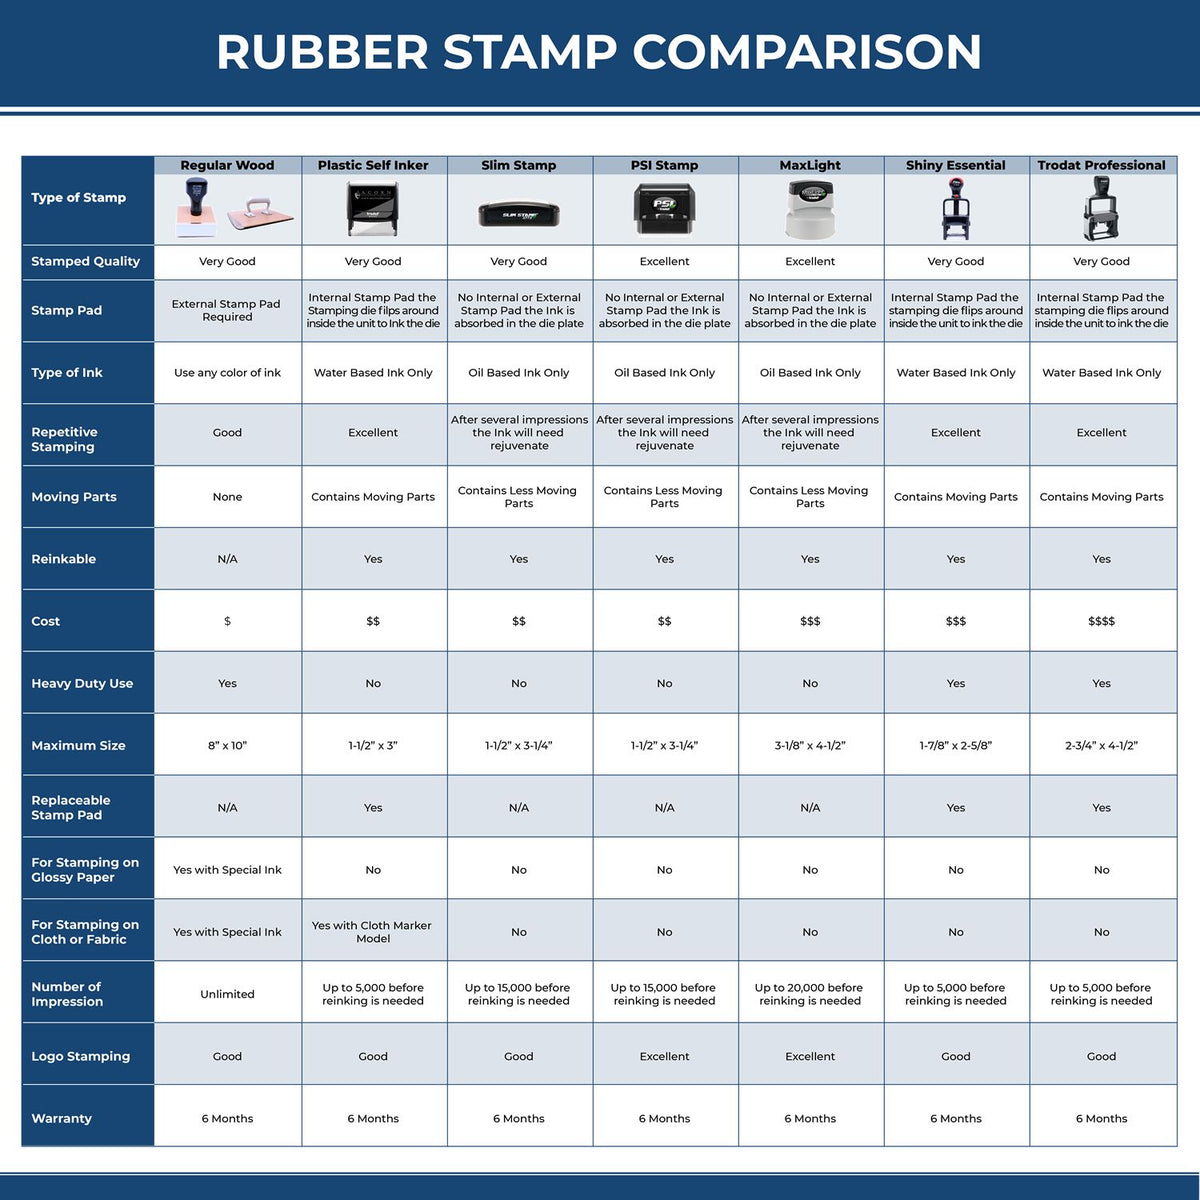 Bold Red Credit Rubber Stamp 4201R Rubber Stamp Comparison